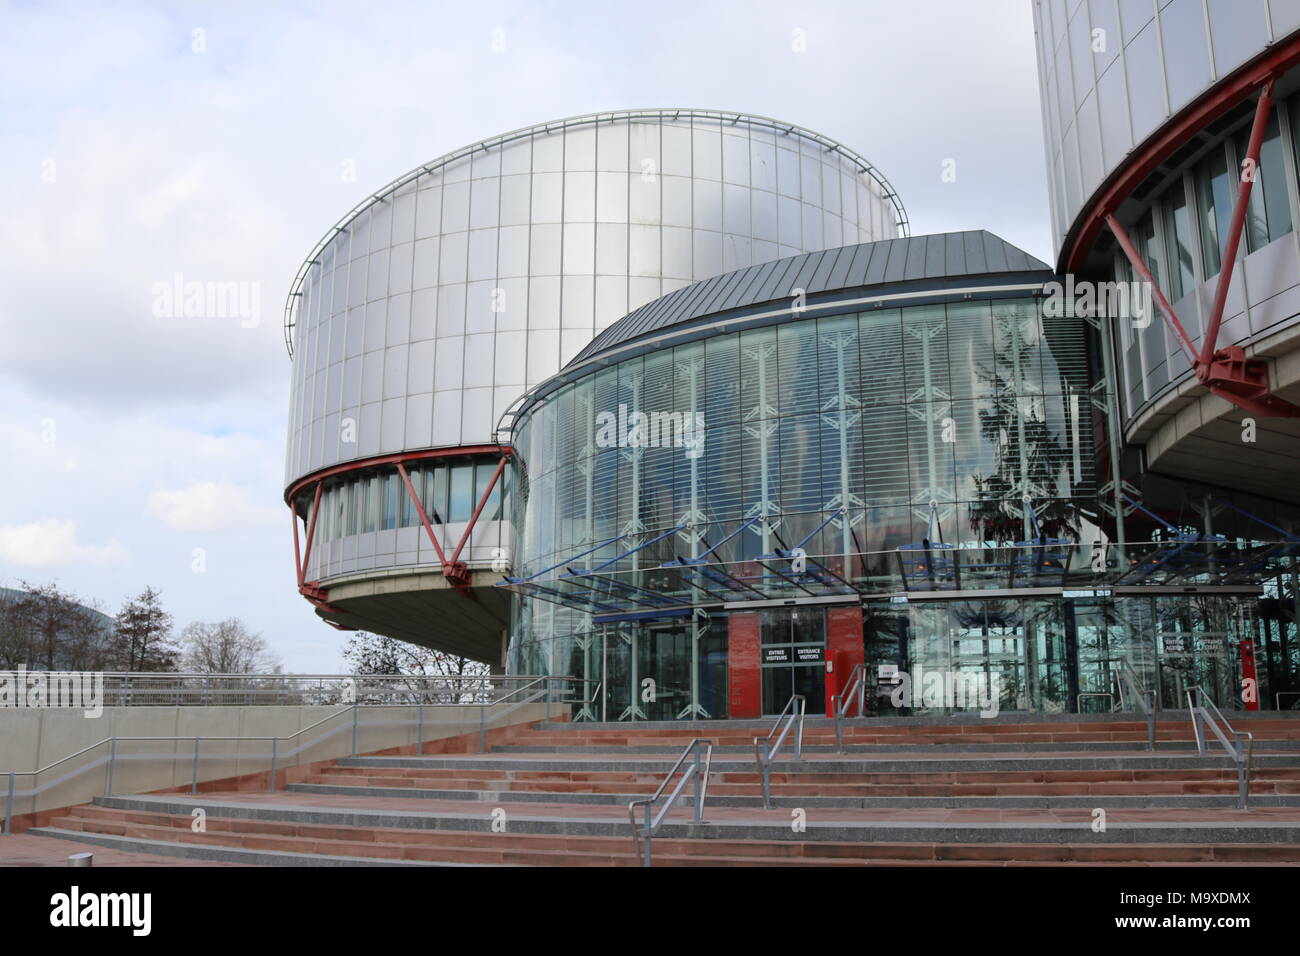 29 March 2018, France, Strasbourg: The European Court of Human Rights (ECHR). In the dramatic legal case surrounding the death of 14-year old French girl Kalinka, her German stepfather Dieter K. is to remain in French imprisonment. The medical doctor failed with his suit before the ECHR on 29 March 2018. Photo: Violetta Kuhn/dpa Stock Photo